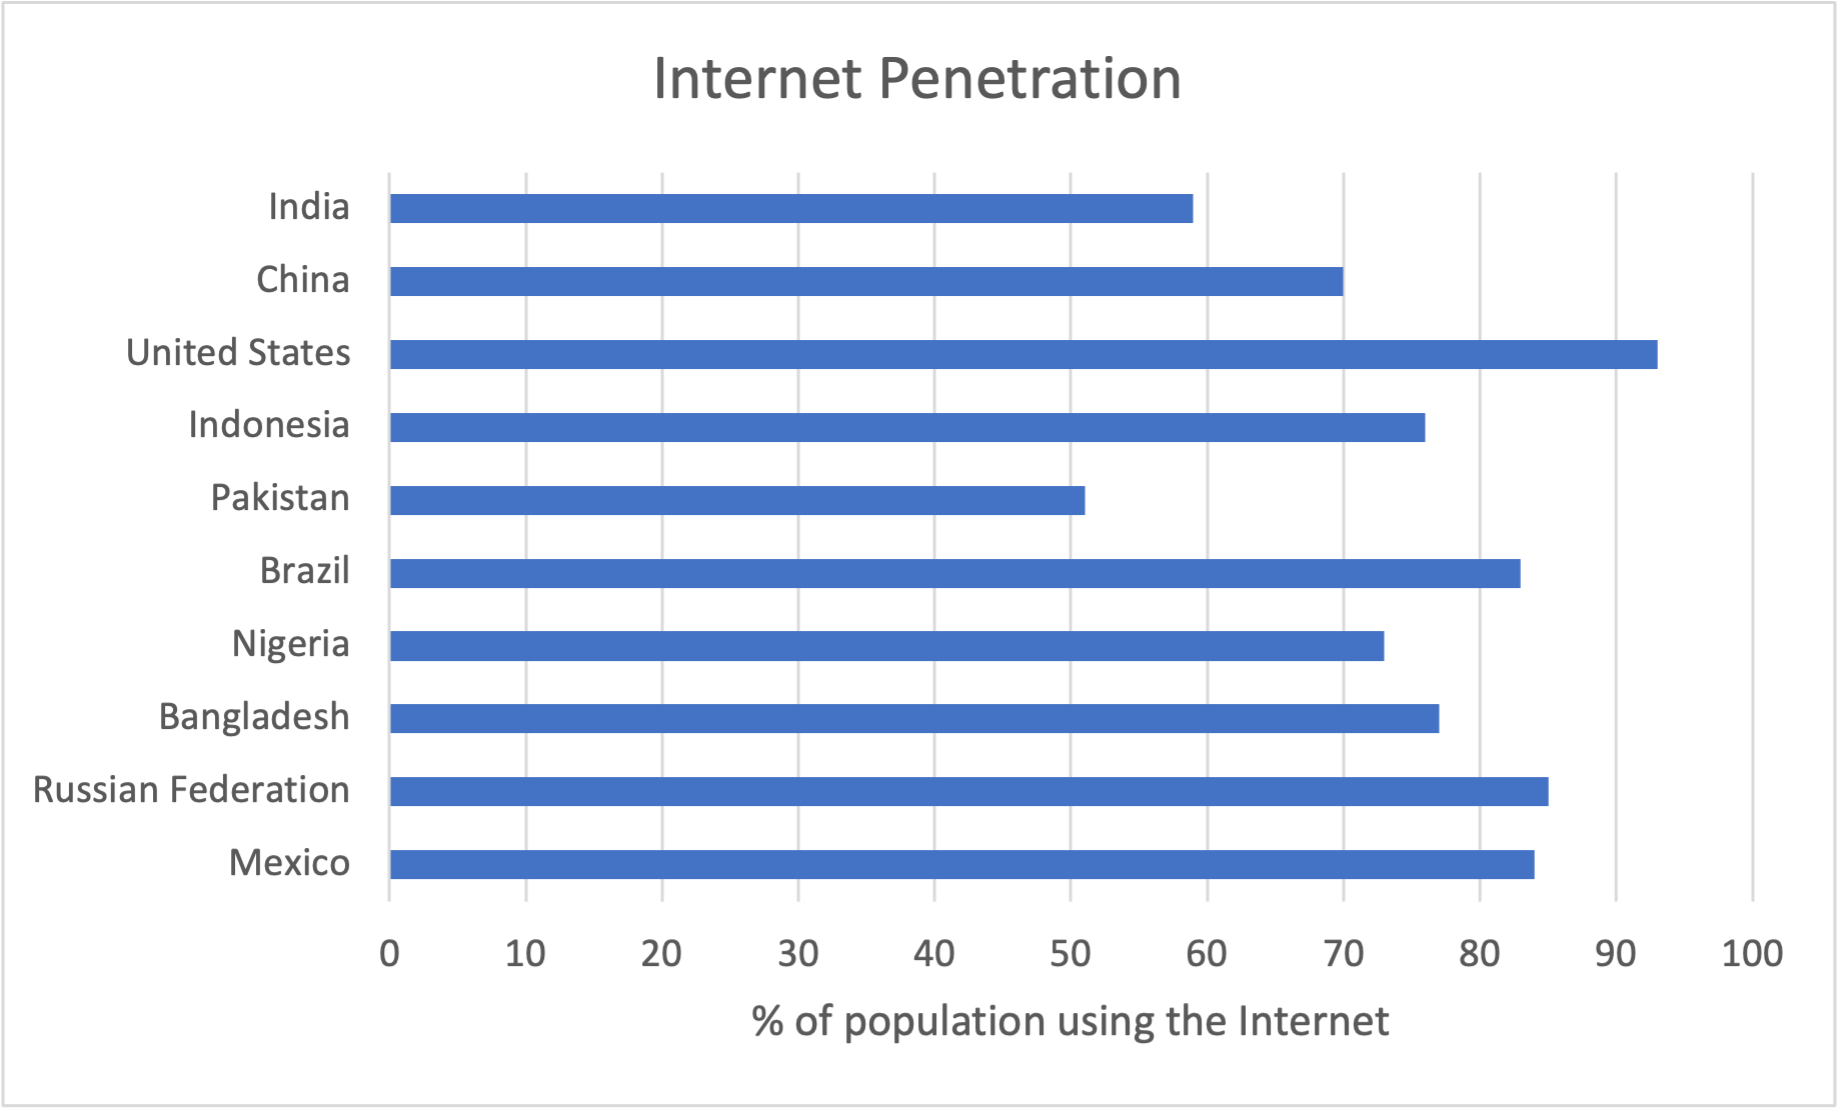 Bar graph showing the Internet penetration for the top 10 most populous countries